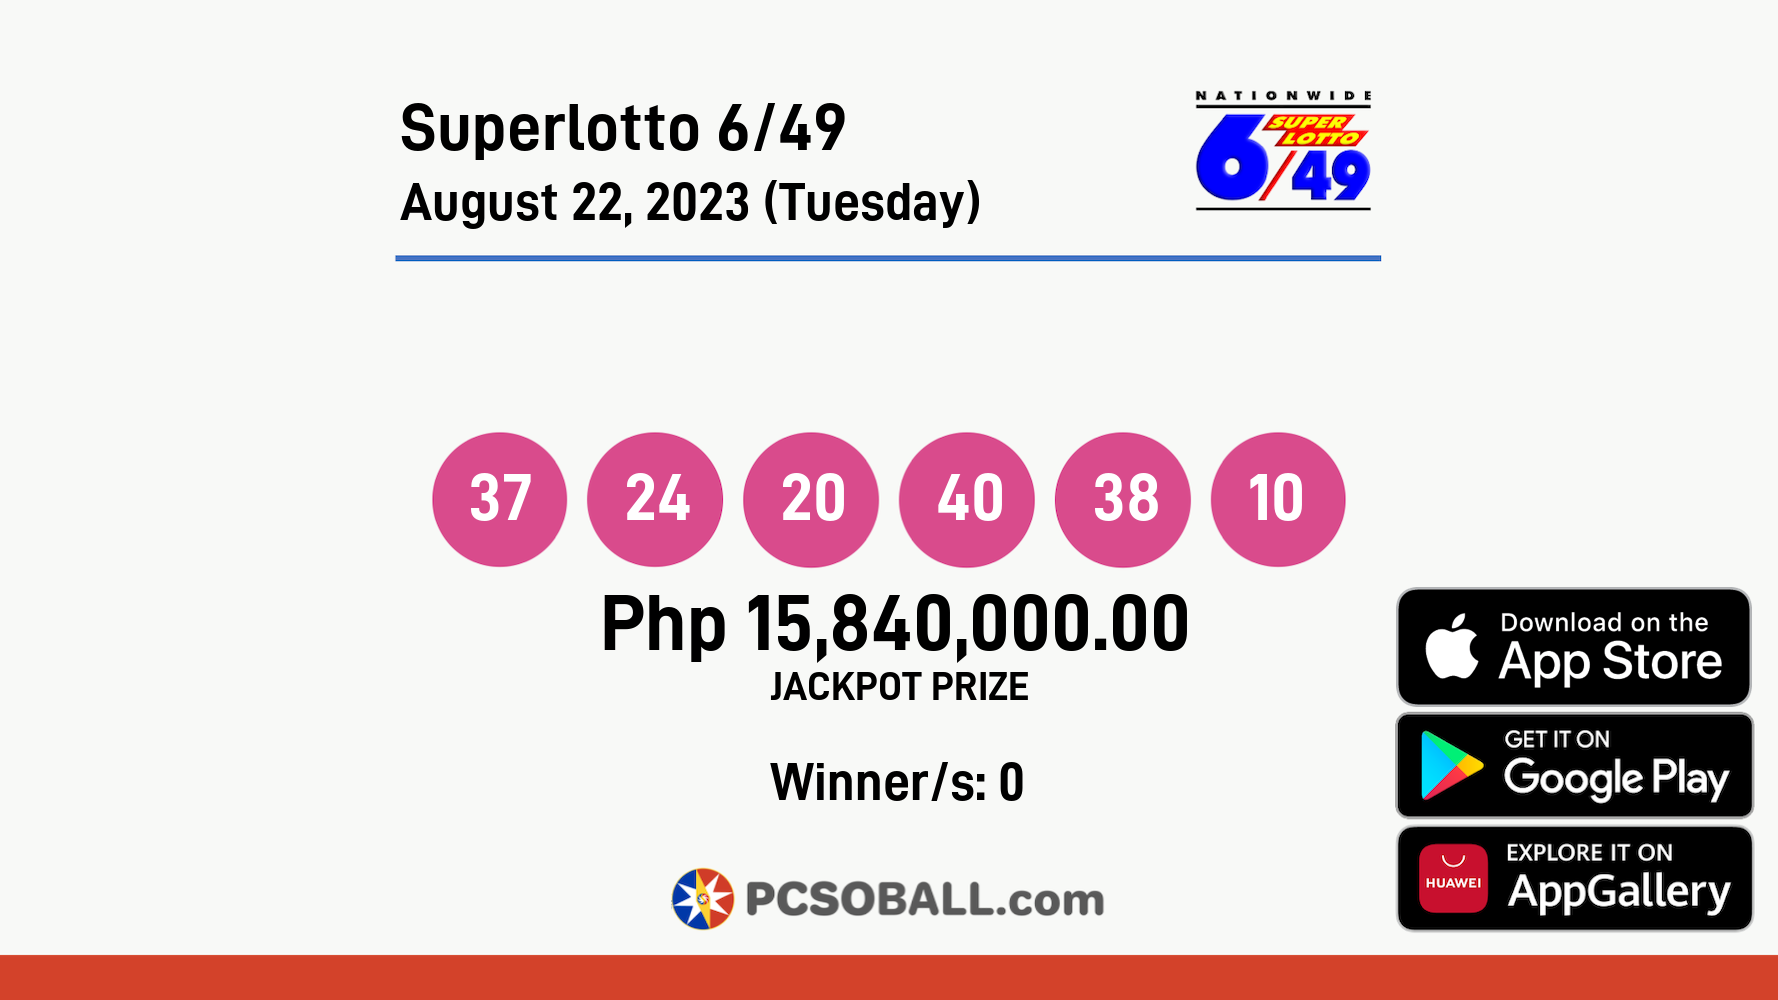 Superlotto 6/49 August 22, 2023 (Tuesday) Result